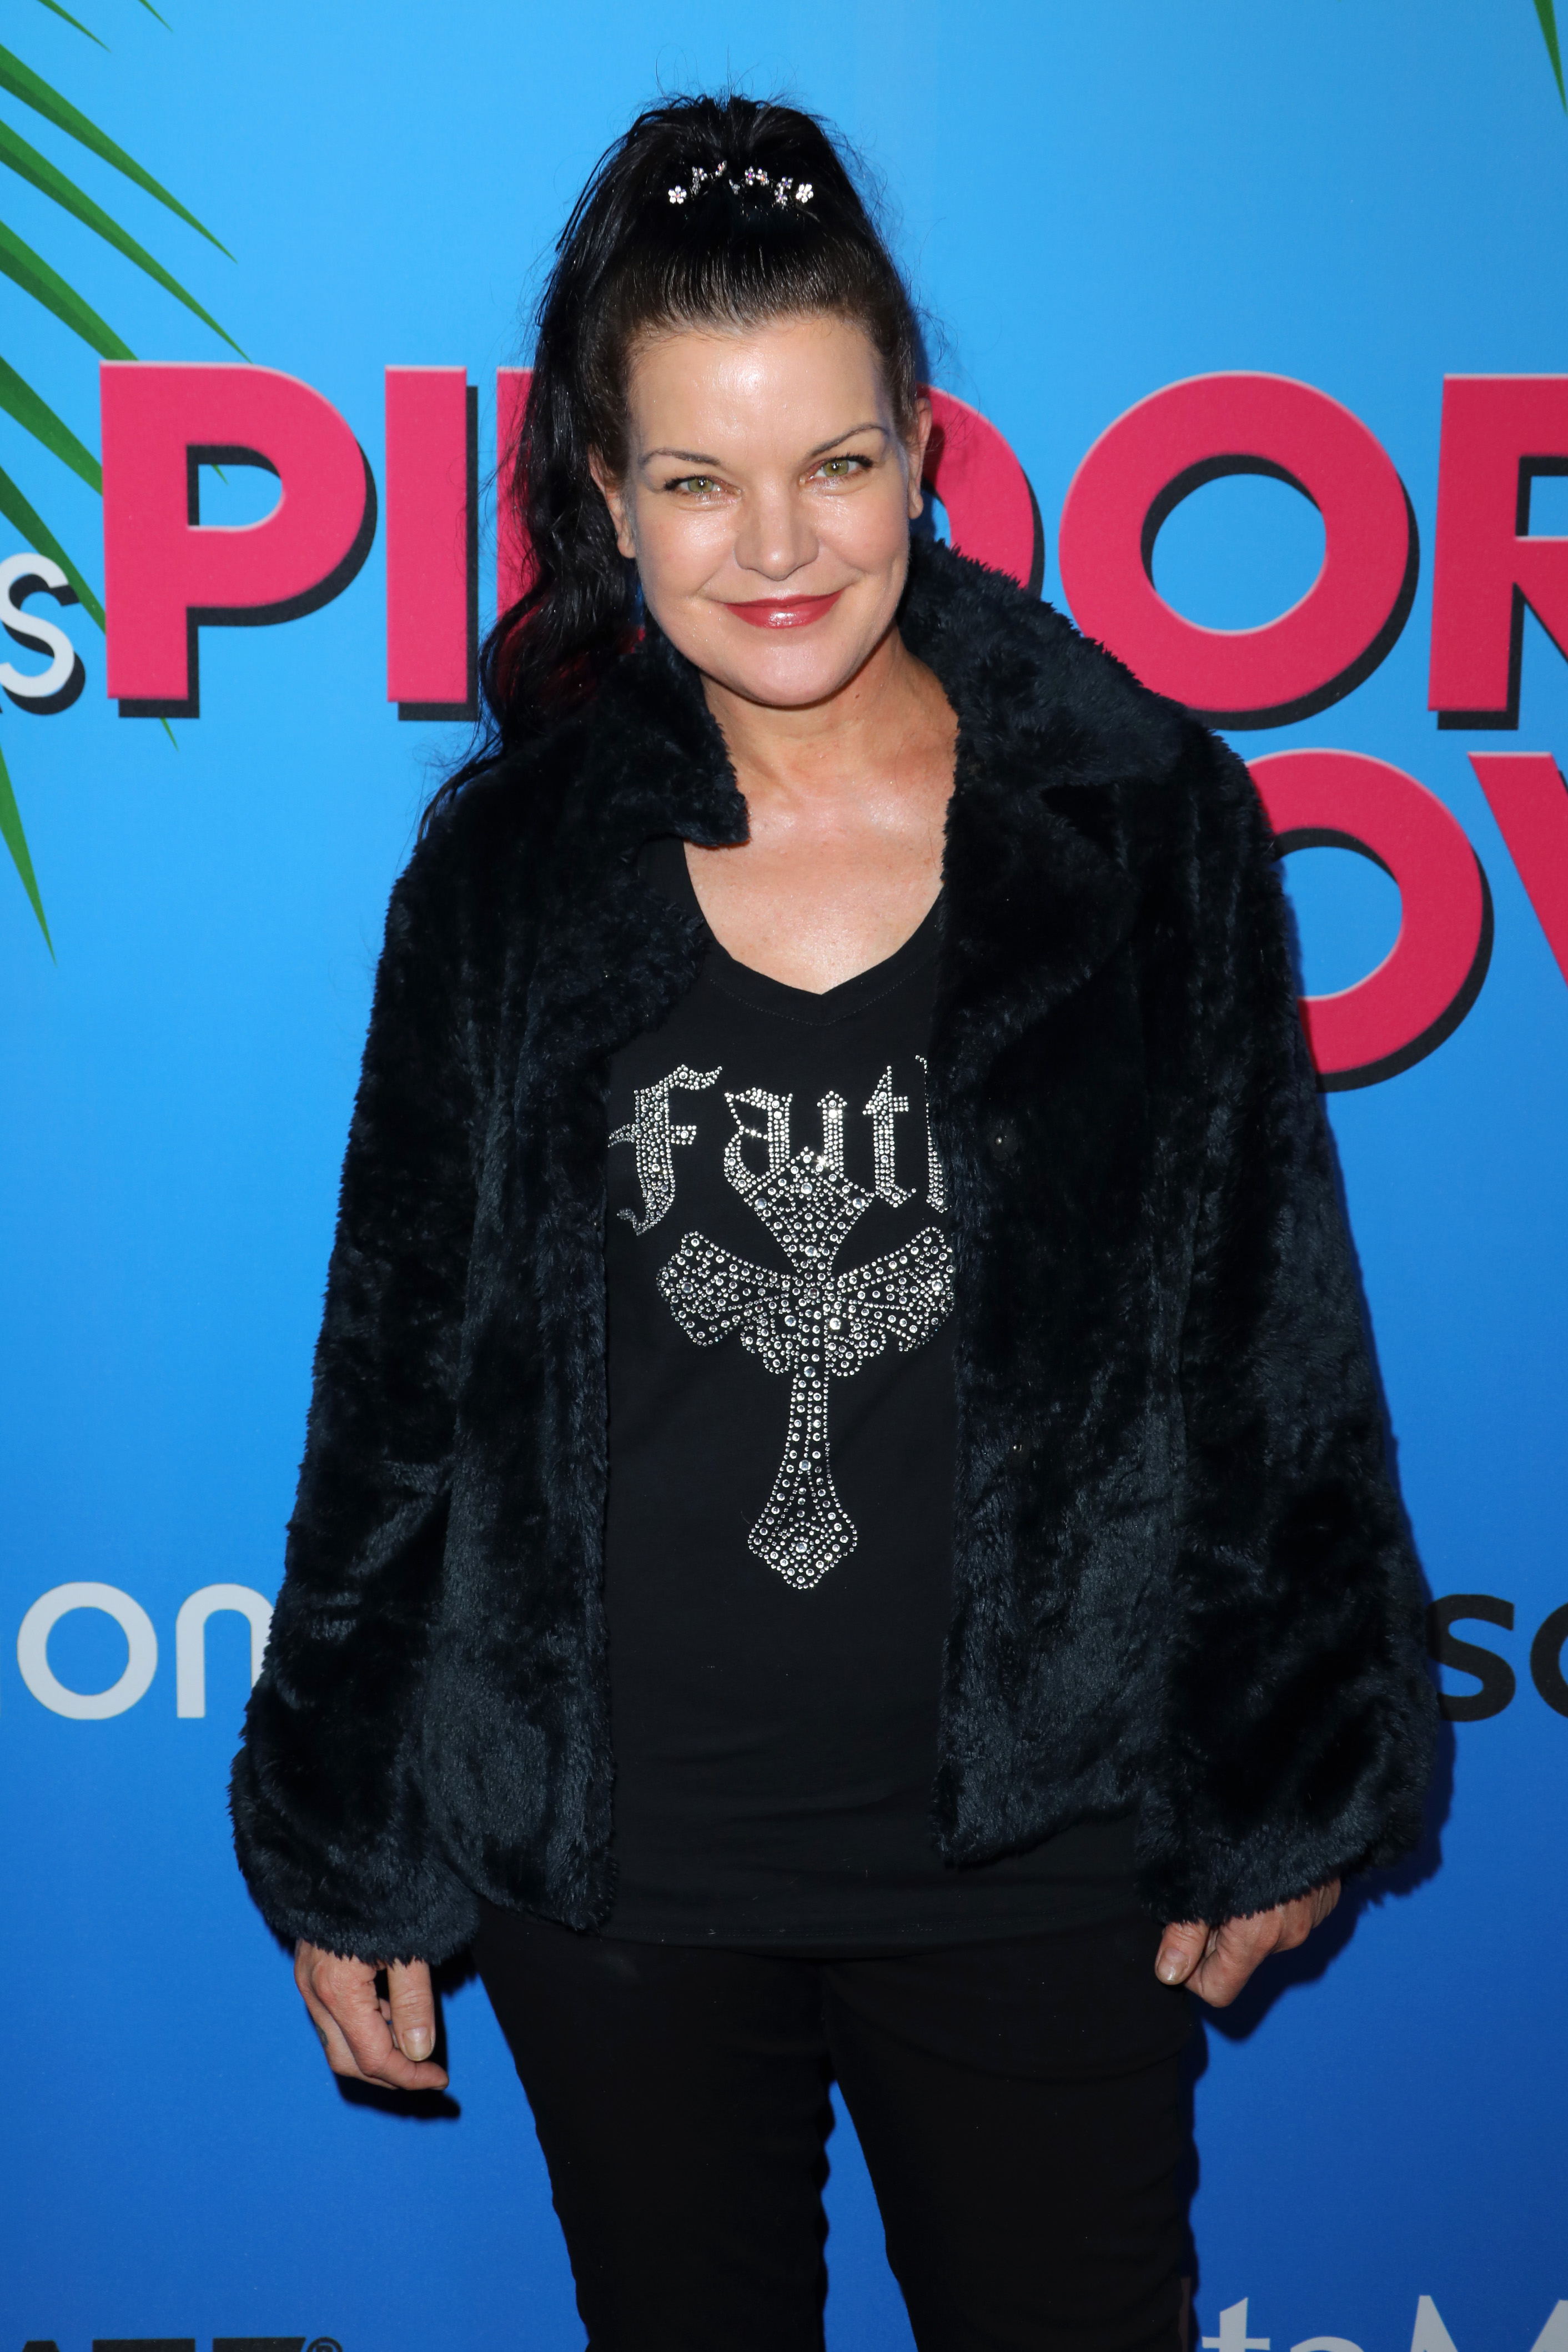 Pauley Perrette attends the premiere of "Las Pildoras De Mi Novio" in Hollywood, California on February 18, 2020. | Source: Getty Images